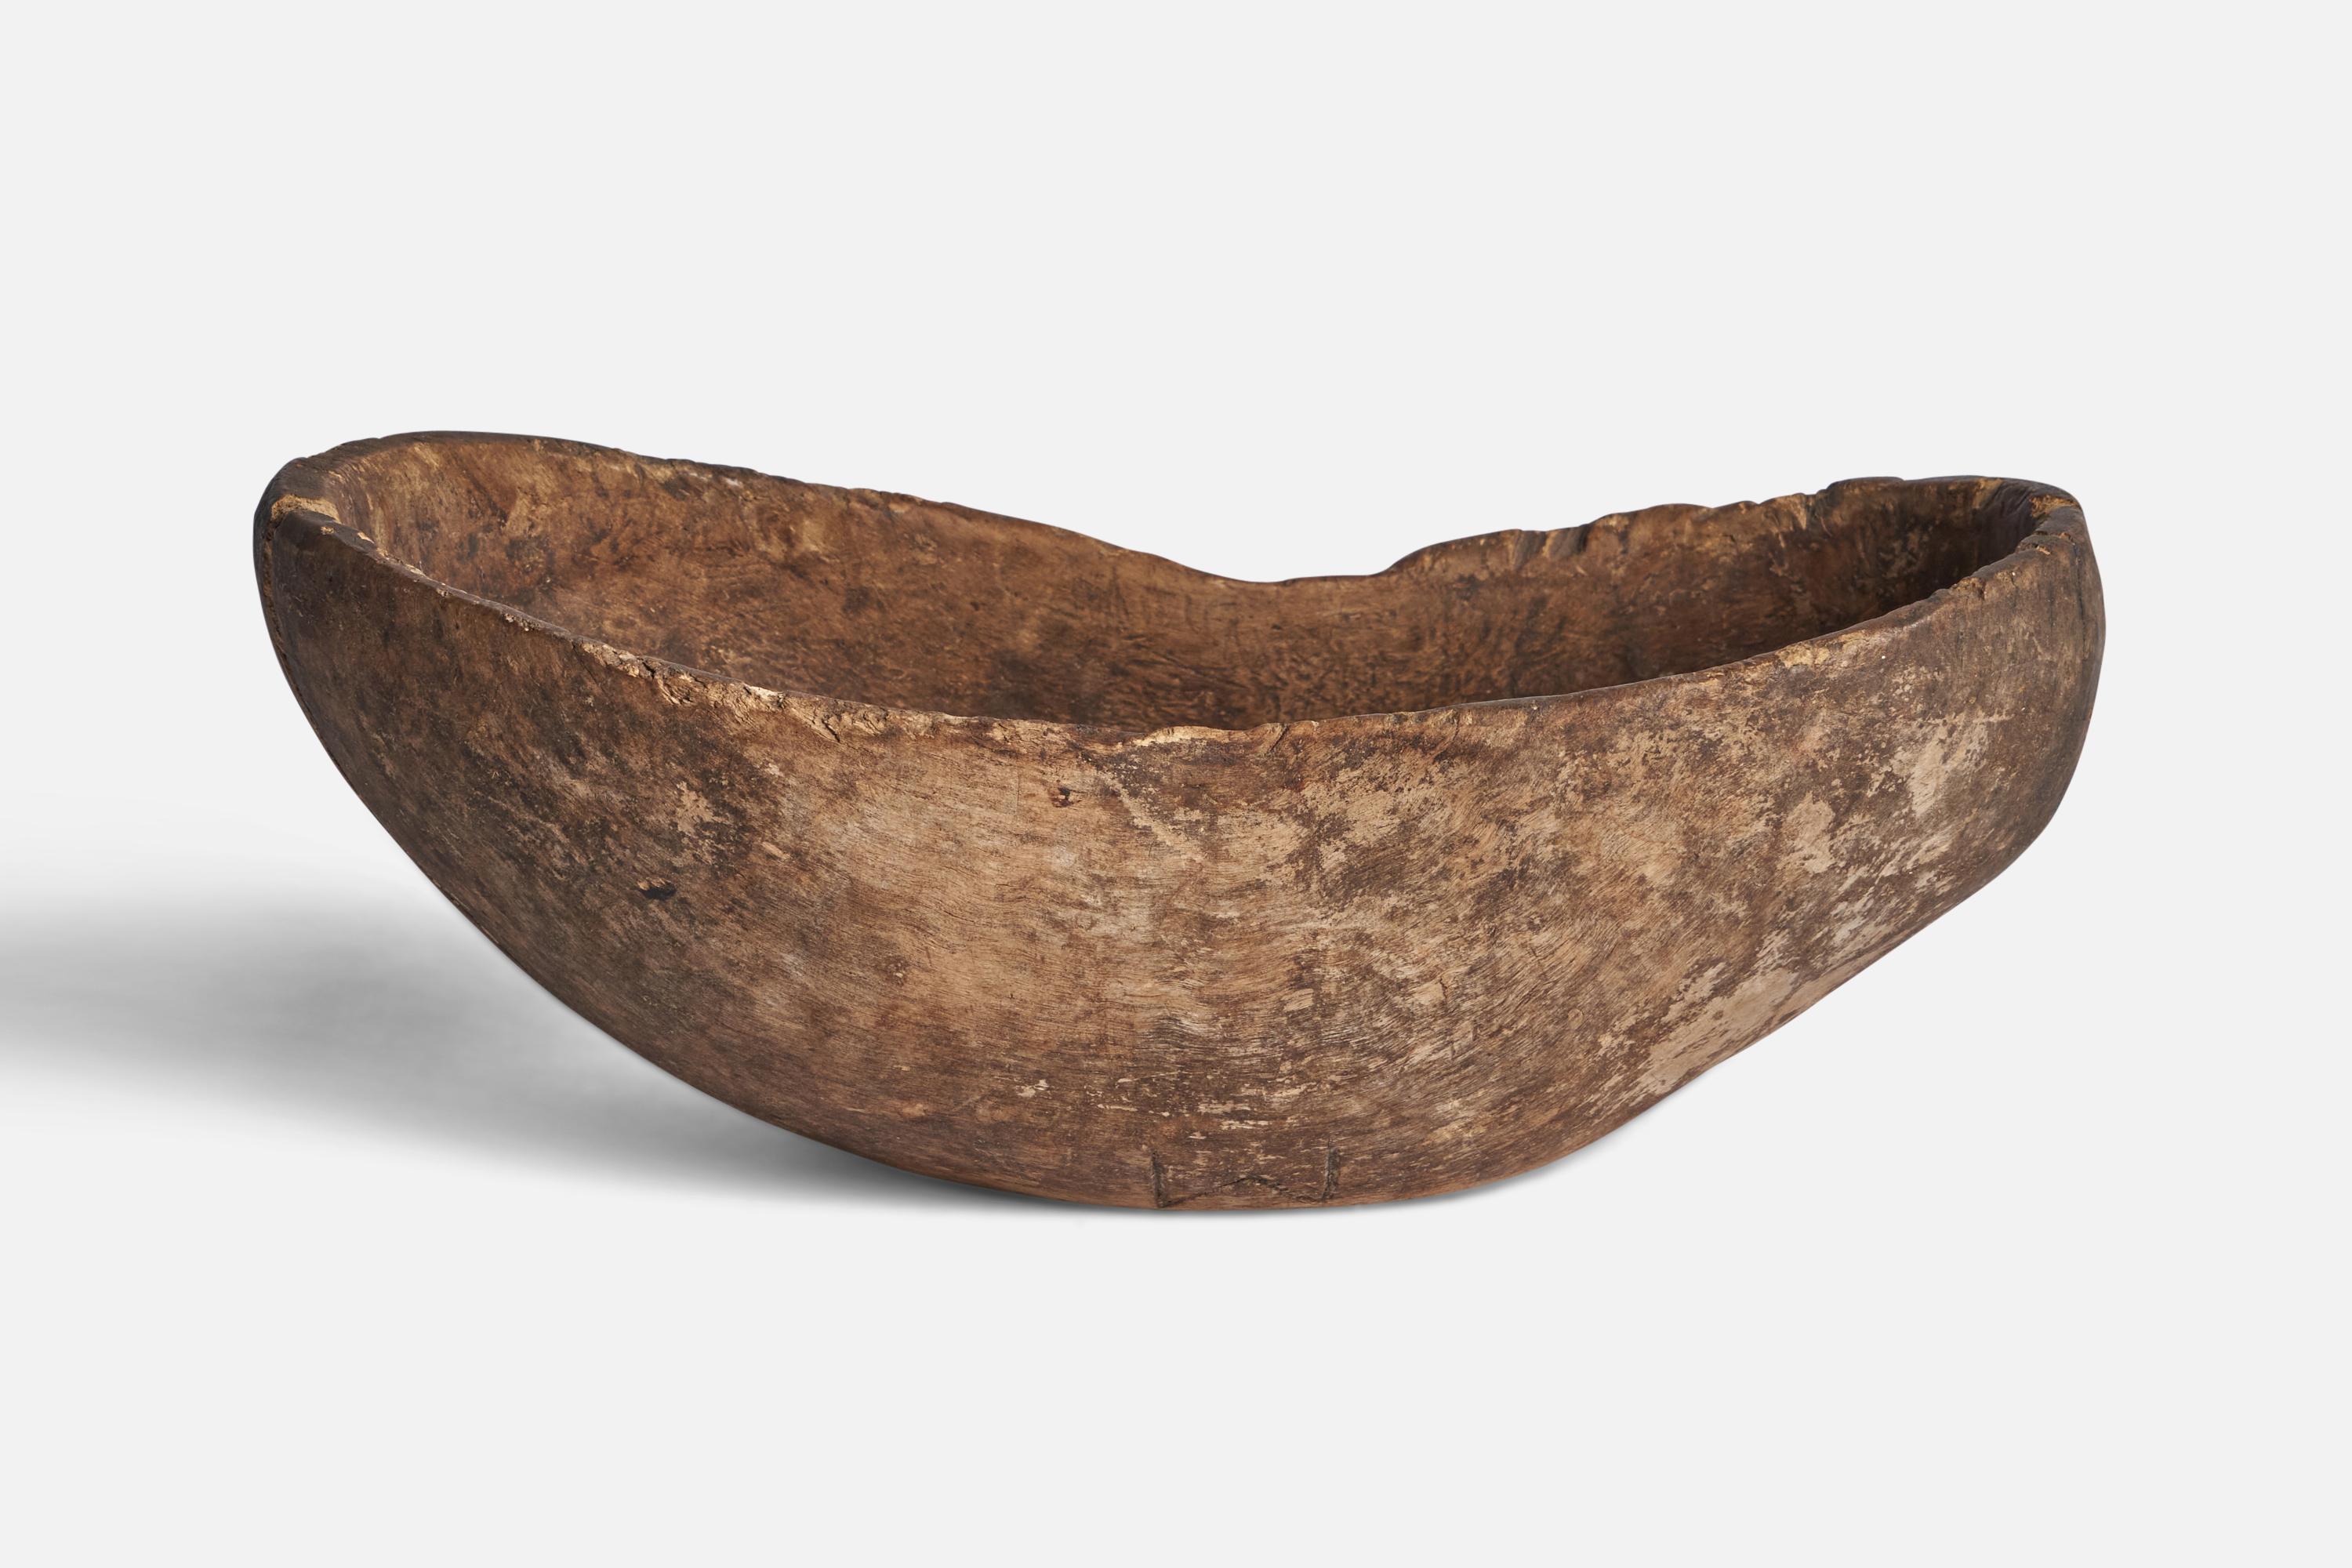 A wooden bowl designed and produced in Sweden in 1668.

“1668” inscription on bottom